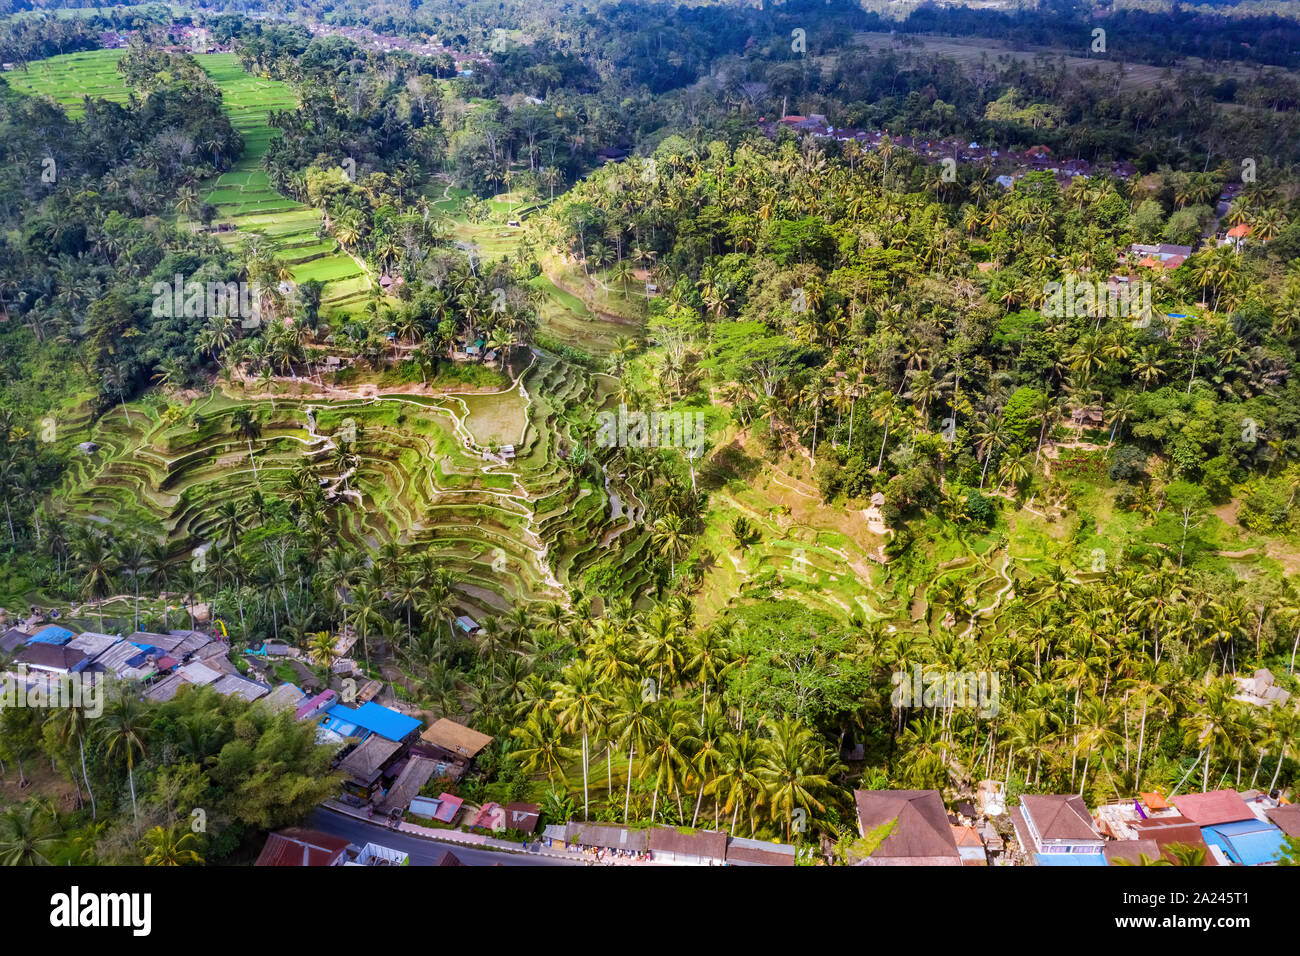 Aerial View of Tegallalang village and Rice Field Terrace, Bandung, West Java Indonesia, Asia. Royalty high quality free stock image of Bali. Stock Photo